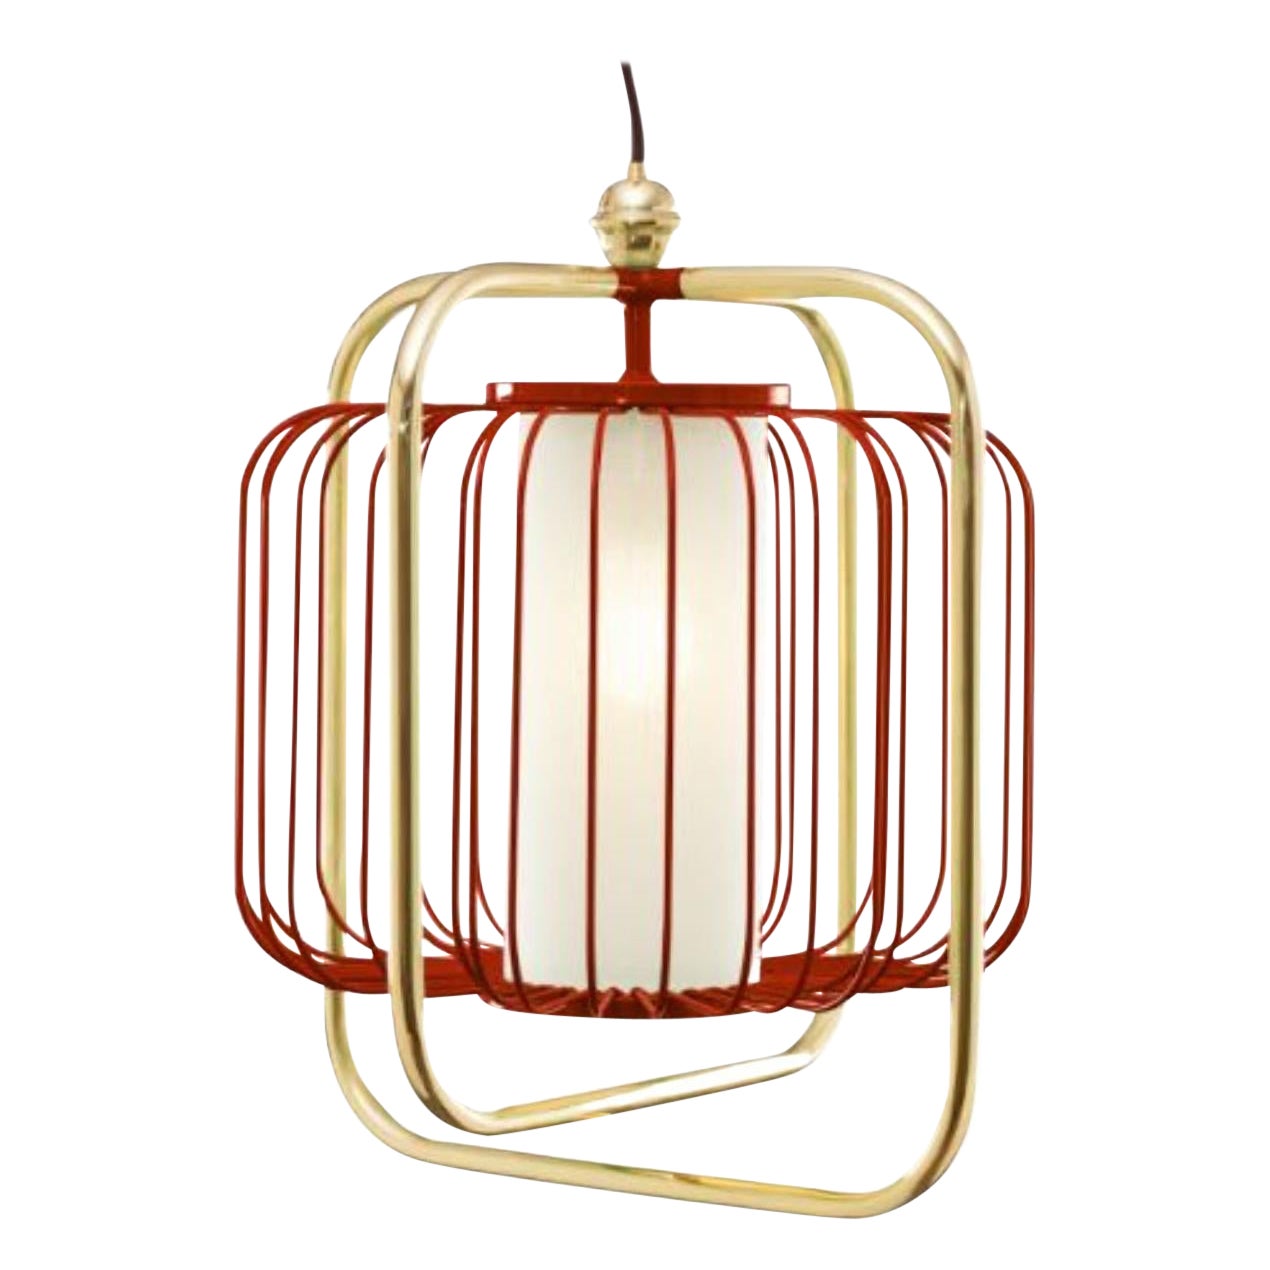 Brass and Lipstick Jules III Suspension Lamp by Dooq For Sale